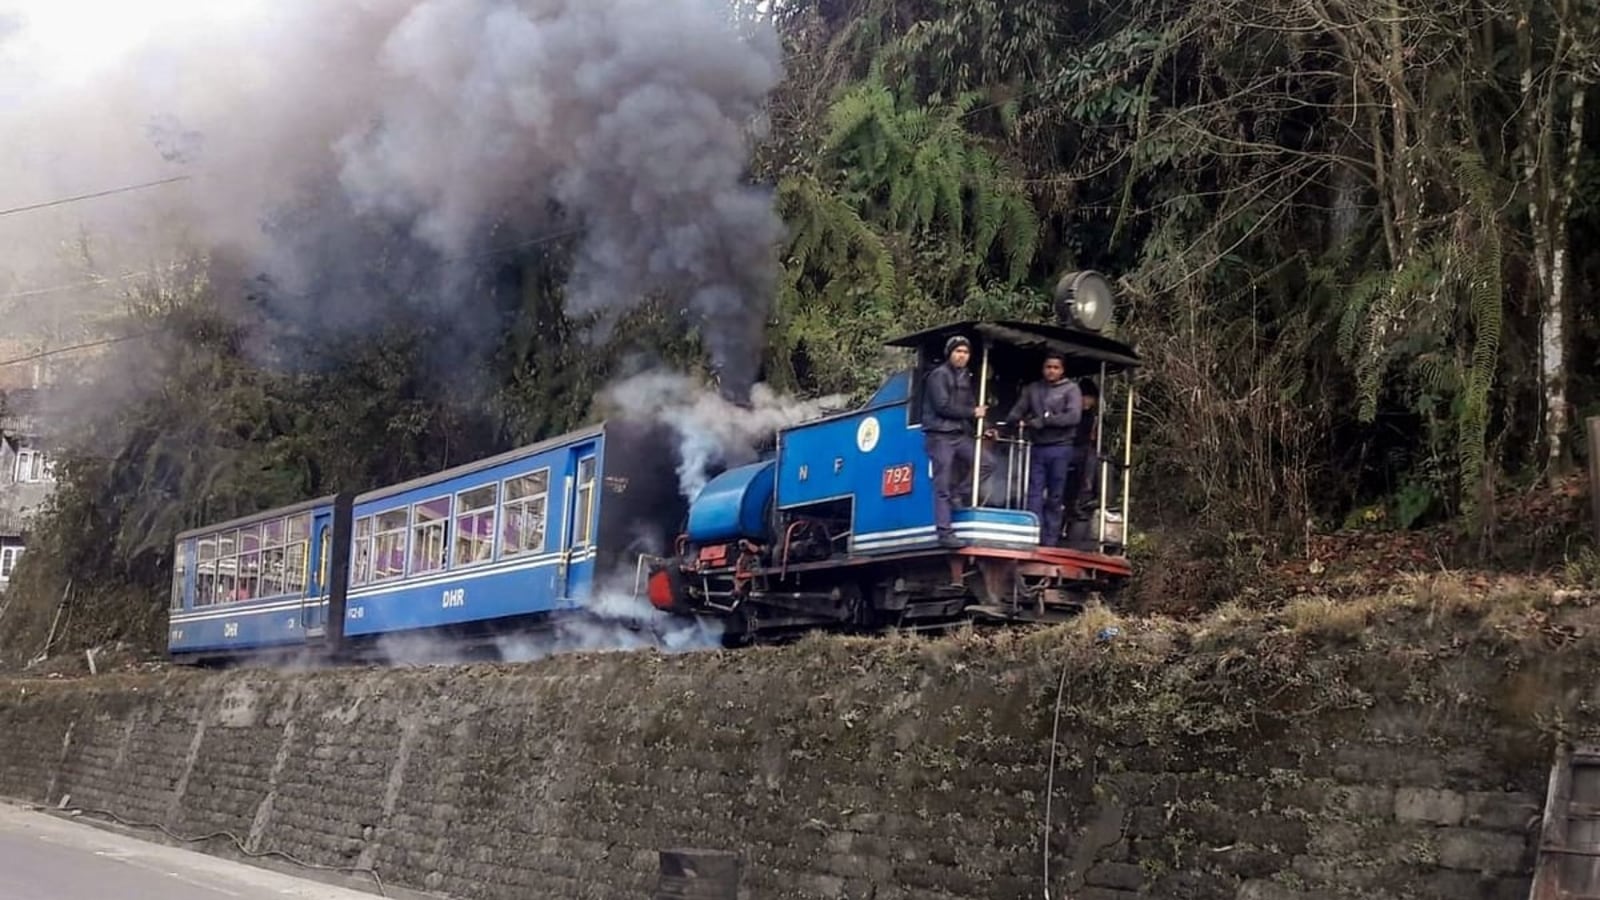 Darjeeling Toy Trains To Be Back On